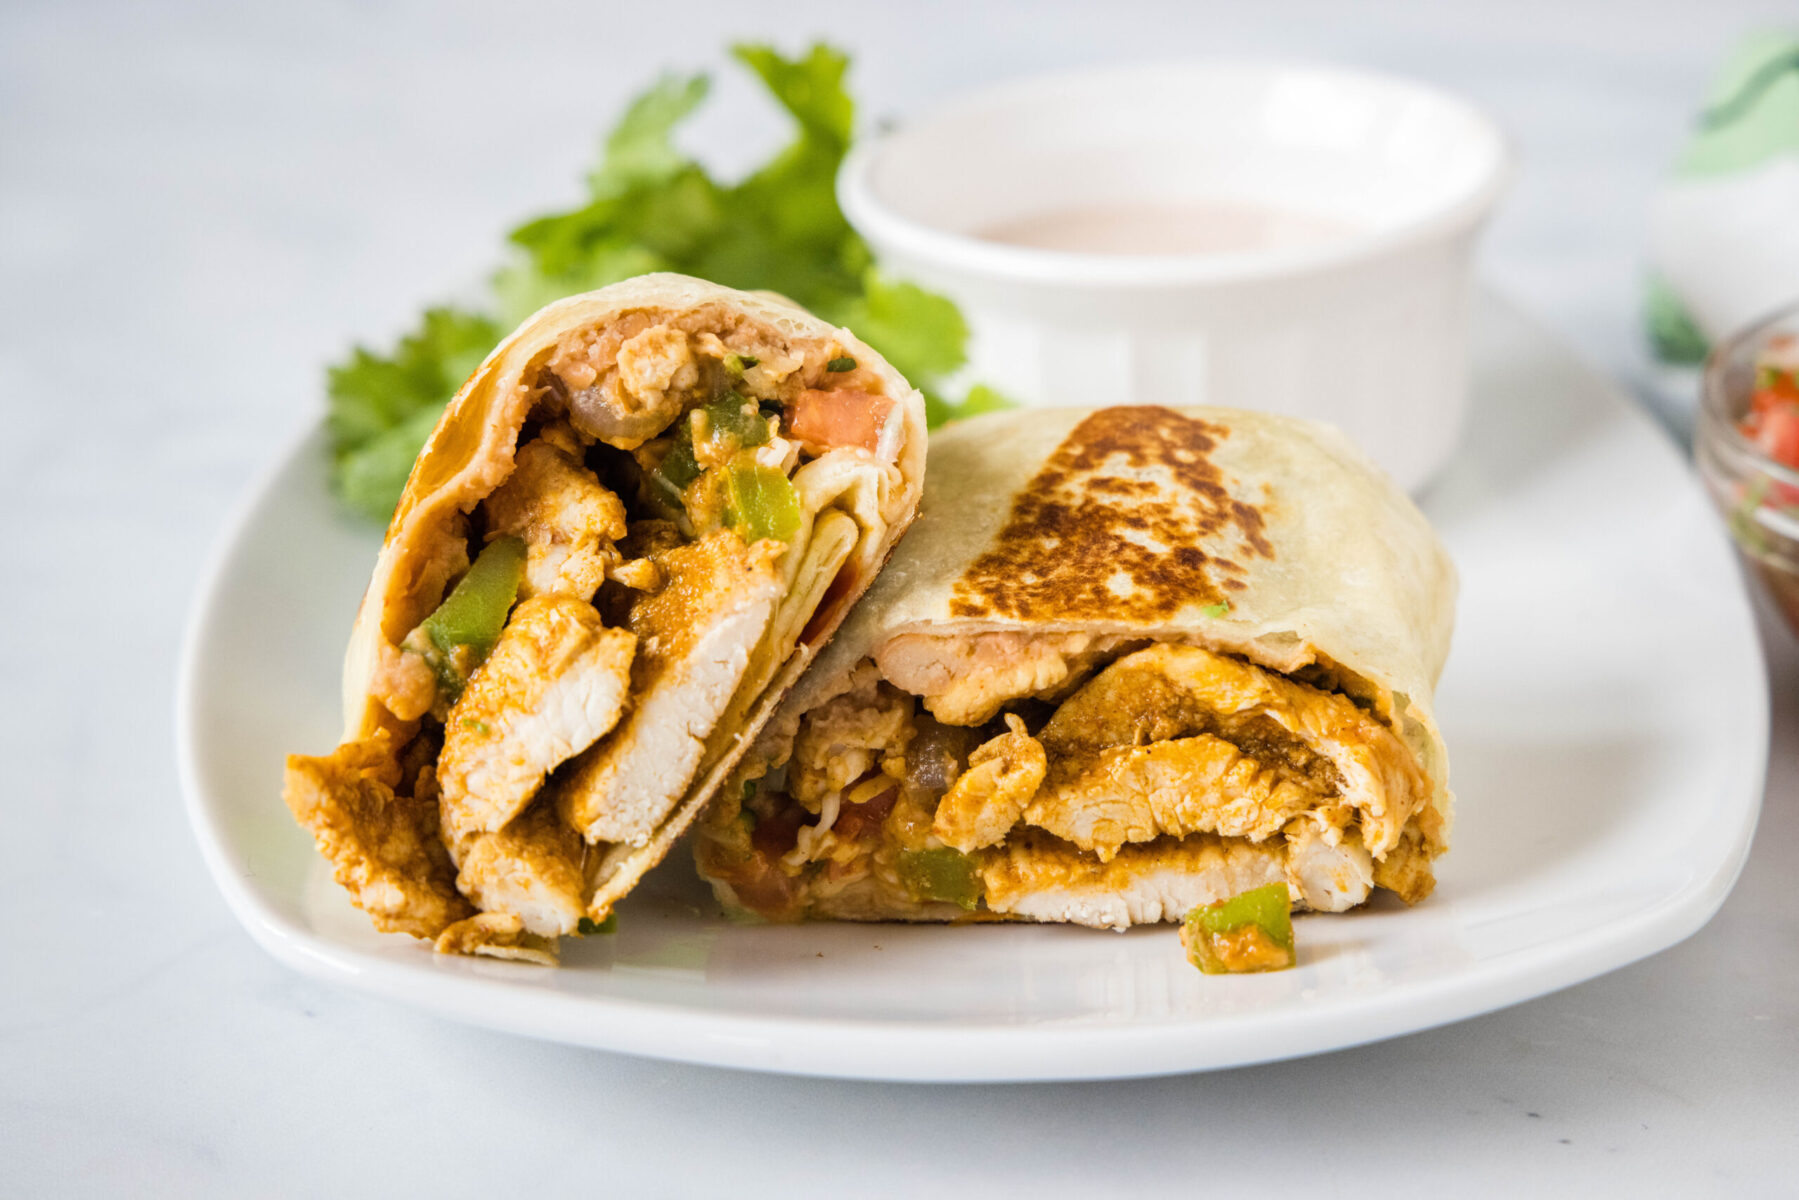 A plate with two halves of a chicken fajita wrap, with a bowl of sauce and lettuce in the background.